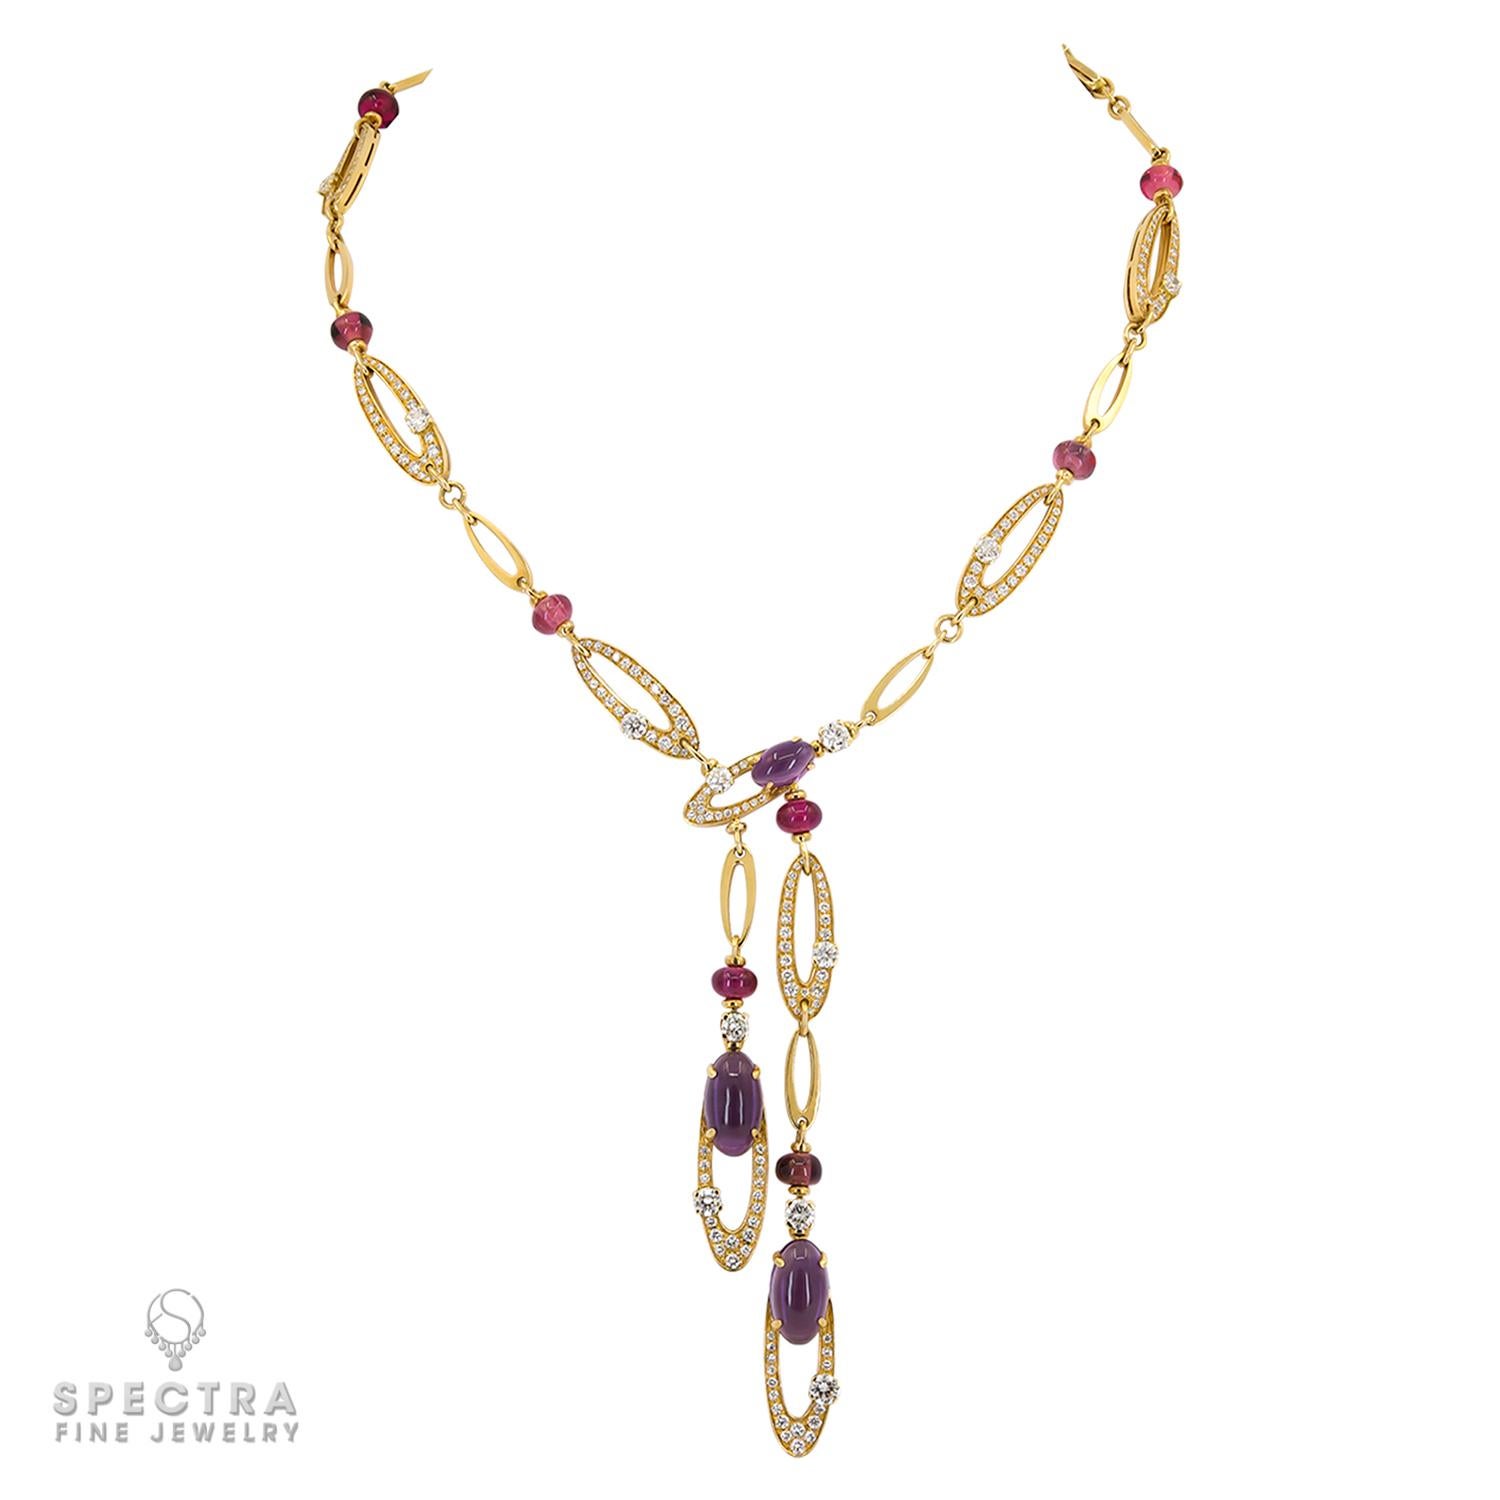 Stunning Multi-colored Gems Diamond 'Elisa' Set by Bulgari, a true masterpiece of fine jewelry. This demi-parure includes a necklace and earrings, meticulously handcrafted and signed by the prestigious brand BVLGARI. Crafted in 18k yellow gold, this